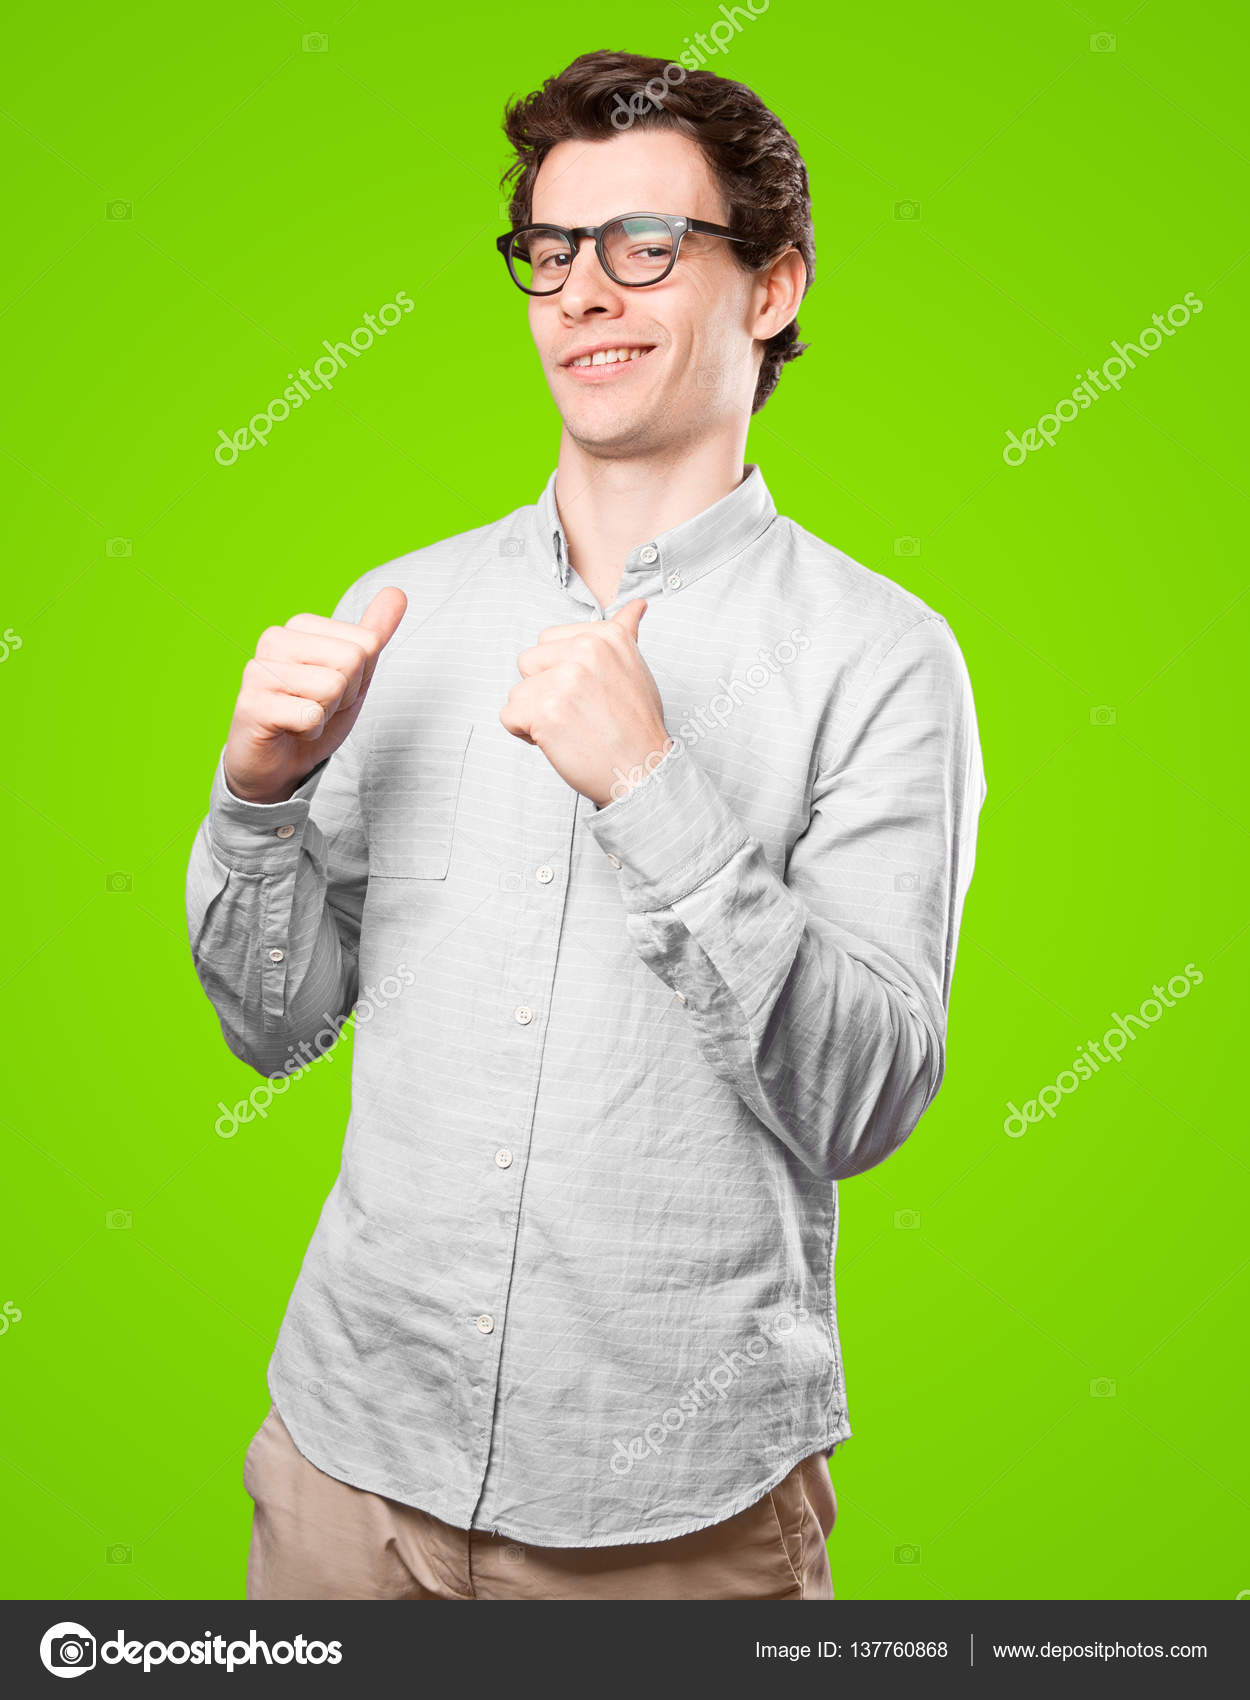 Haughty young man posing — Stock Photo © agongallud #137760868